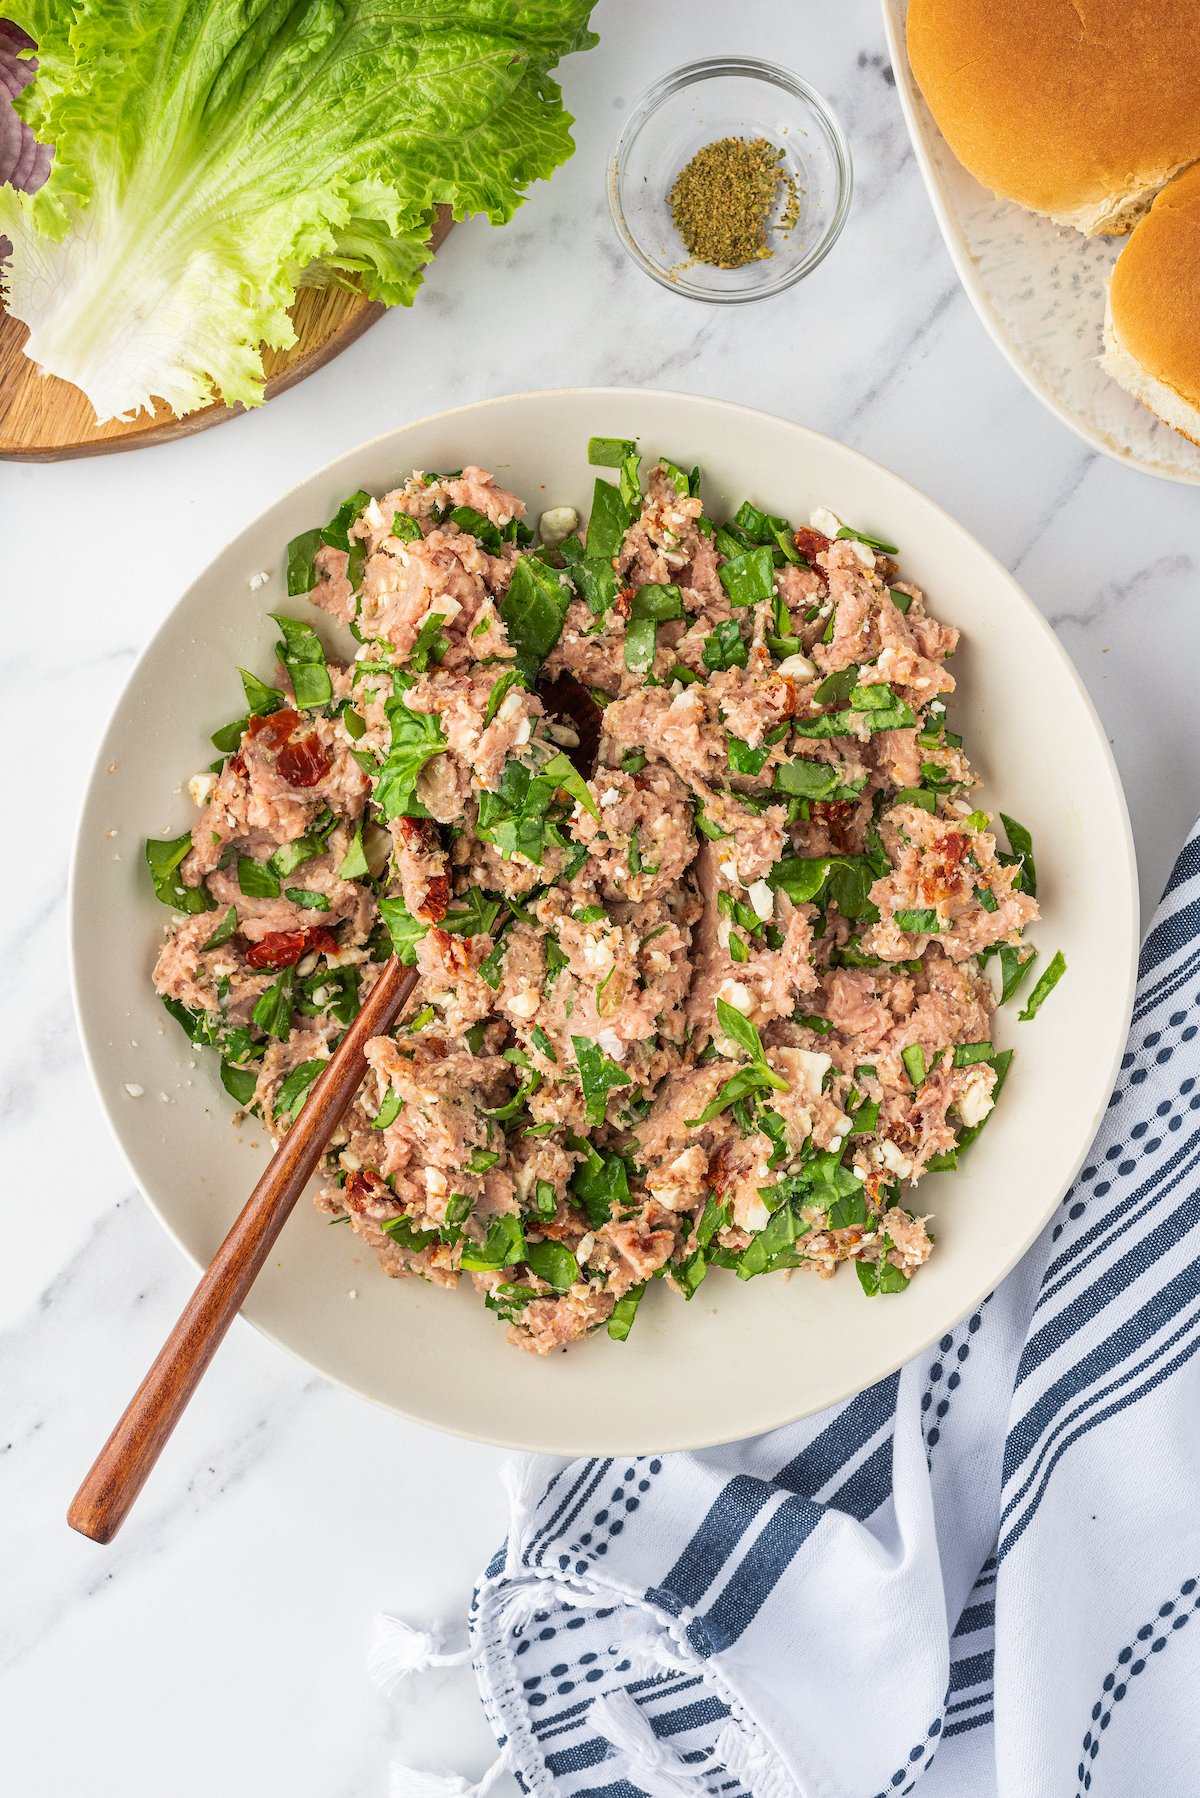 Ground turkey mixed with chopped spinach and other ingredients in a large bowl.